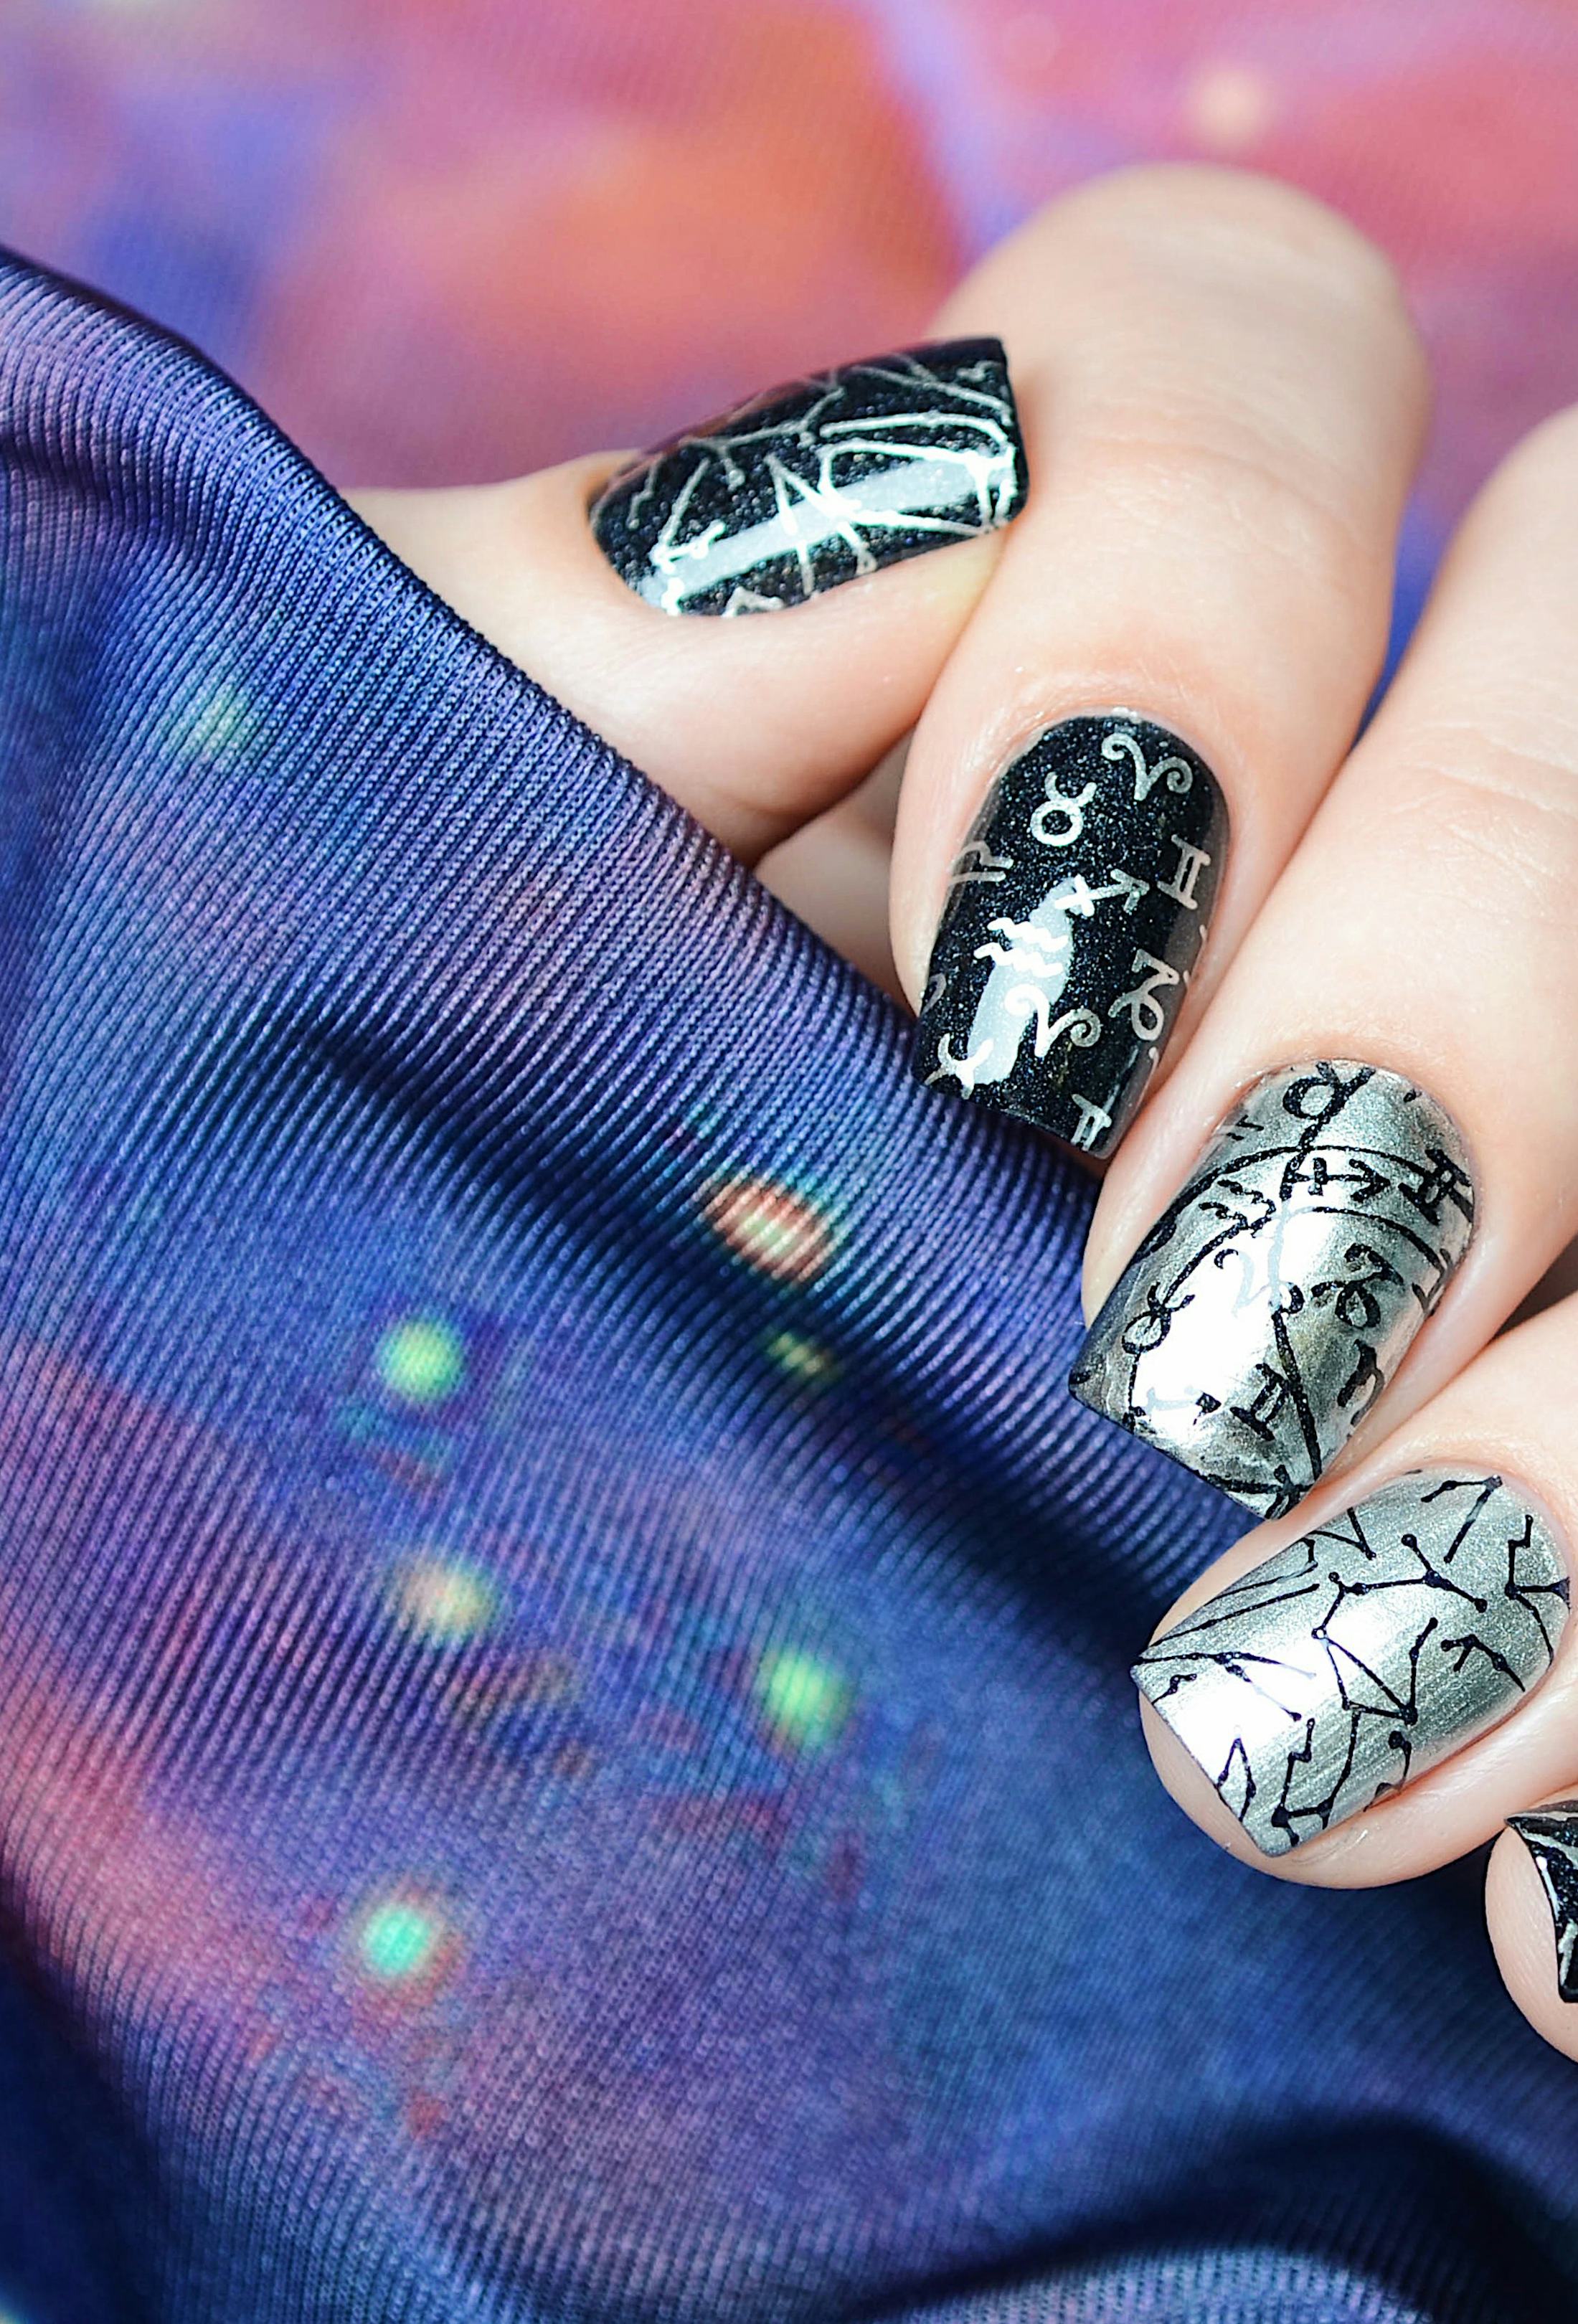 10 Scorpio Nail Designs To Inspire Your Next Manicure